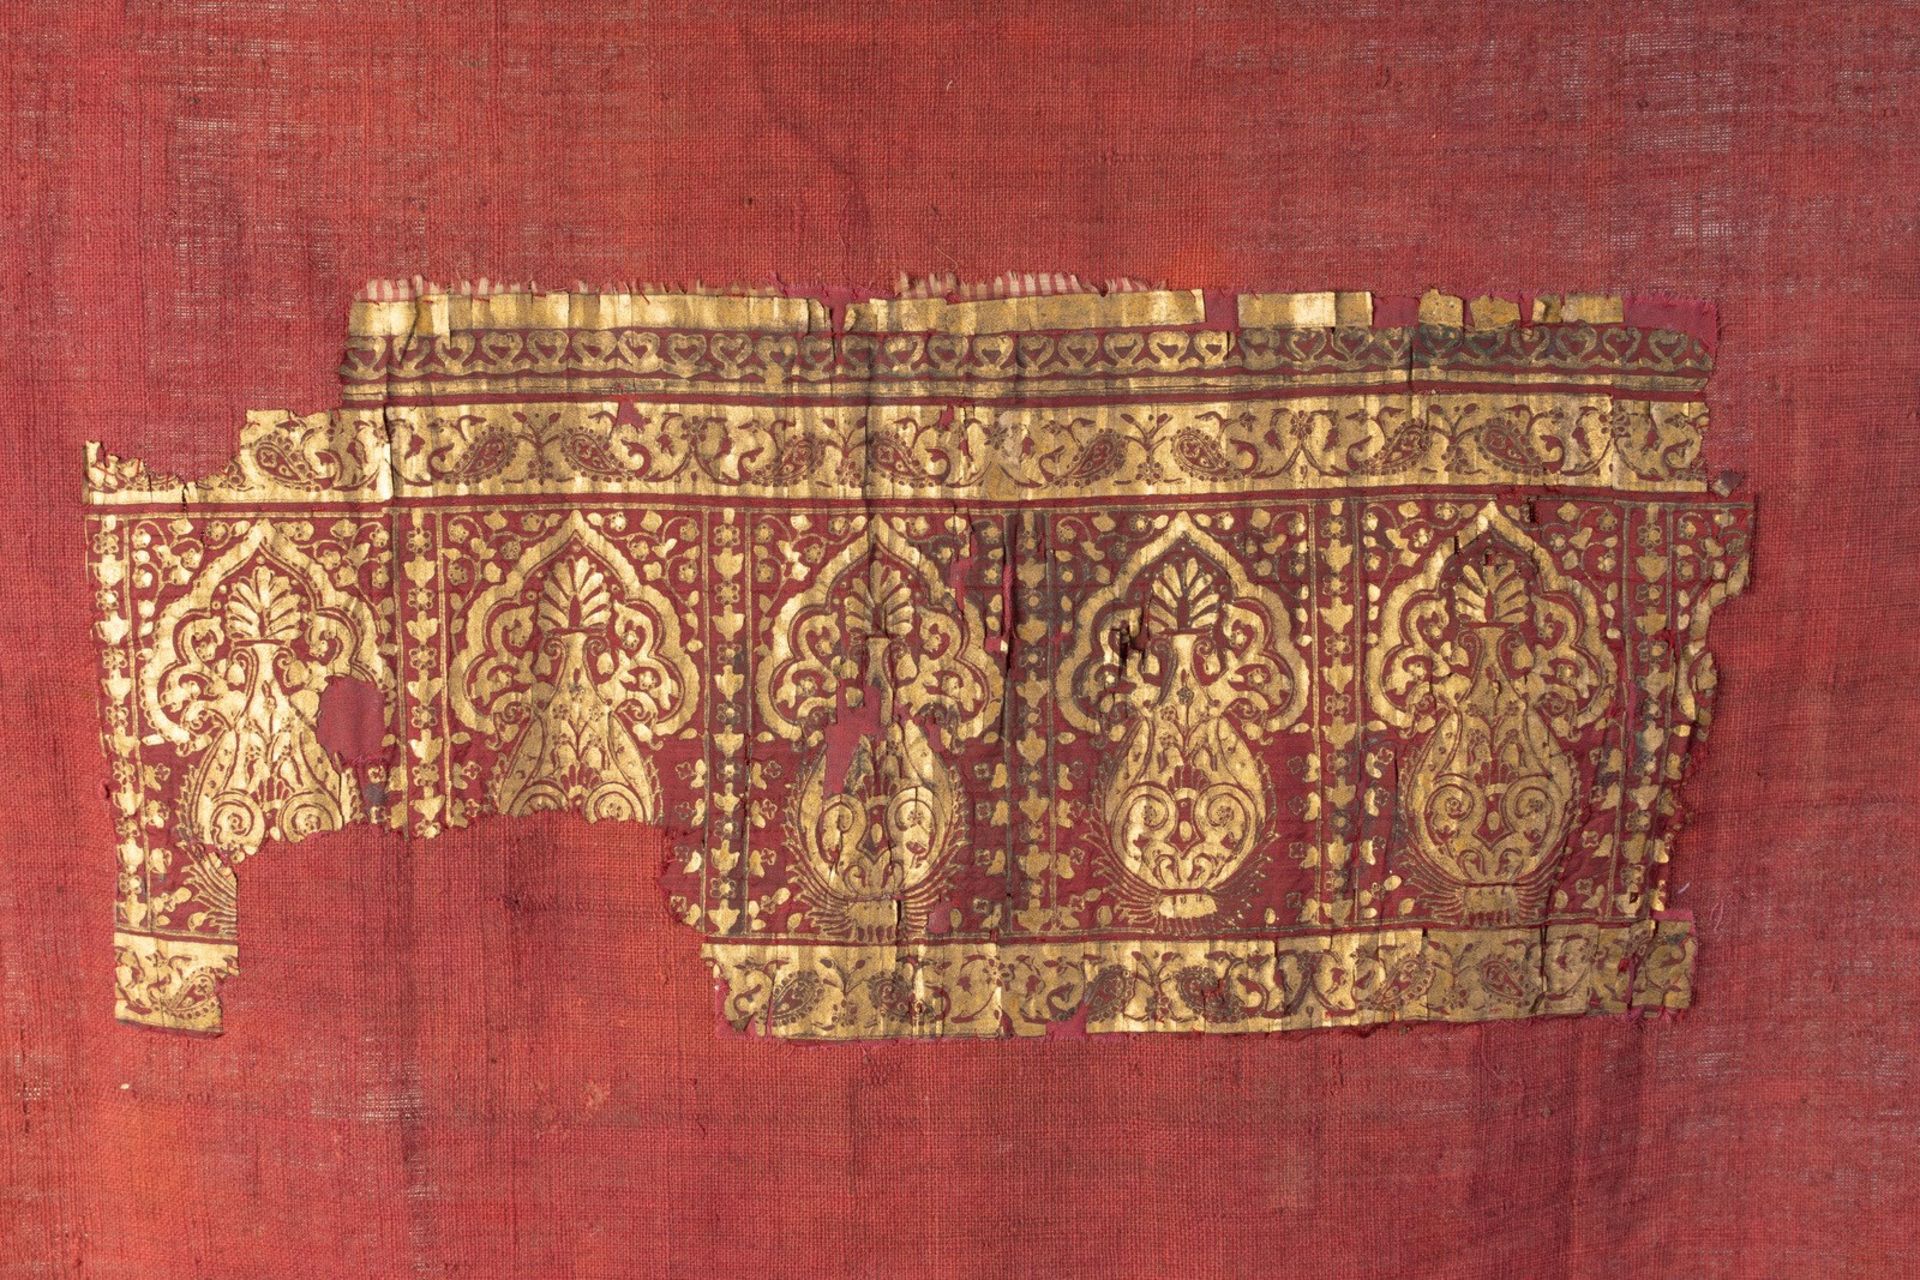 Arte Islamica An early Mughal textile fragment decorated with gold leafIndia, 16th-17th century .